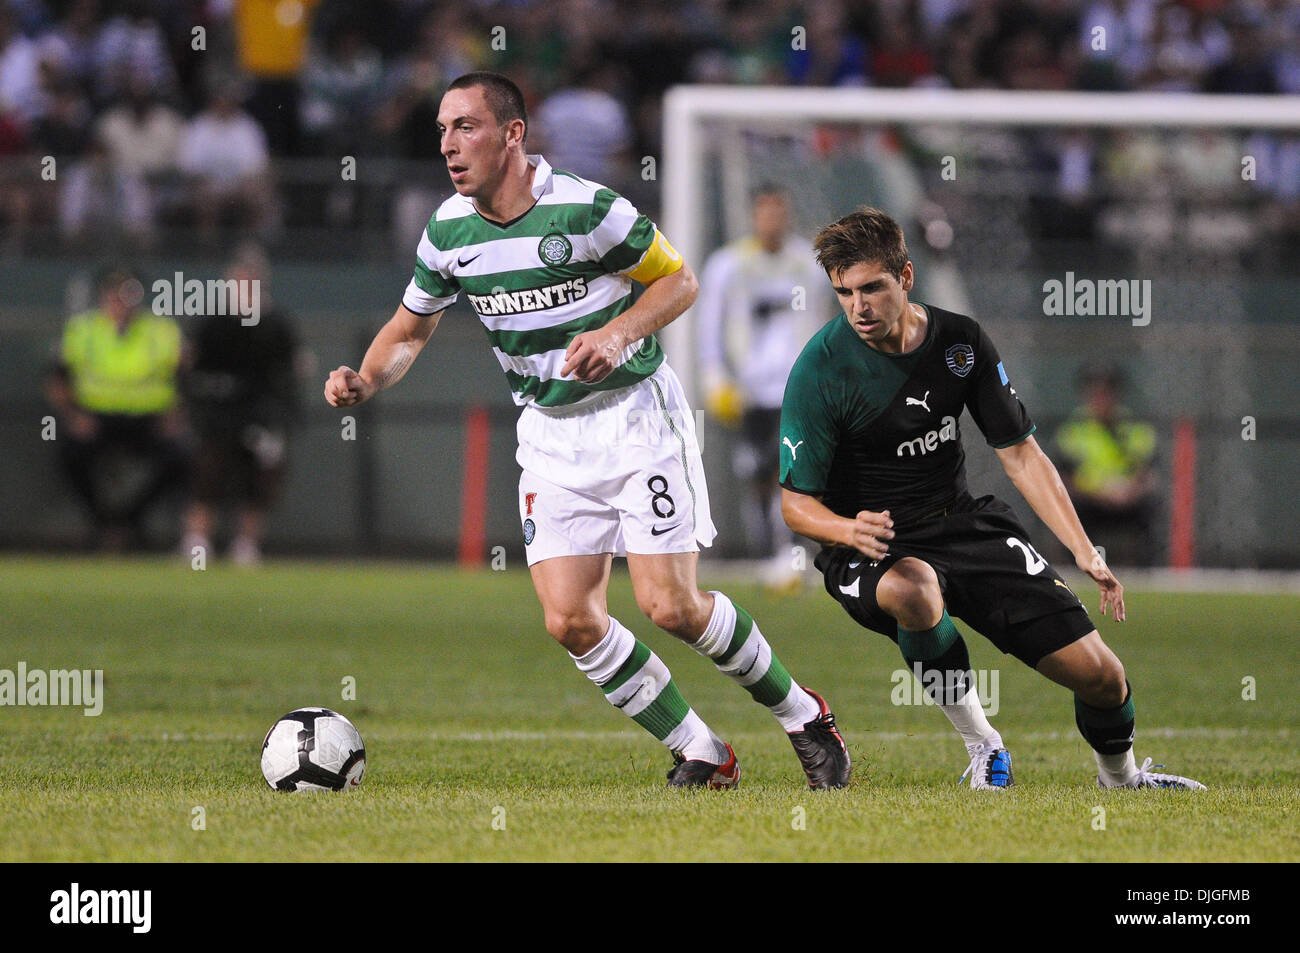 July 21, 2010 - Boston, Massachusetts, United States of America - 21 July 2010: Celtic midfielder Scott Brown (8) works the ball past Sporting midfielder Miguel Veloso (24). Celtic FC defeated Sporting 6 - 5 in penalty kicks, with a final 1 - 1 score during an international friendly at Fenway Park, Boston, Massachusetts to win the first Fenway Football Challenge..Mandatory Credit:  Stock Photo